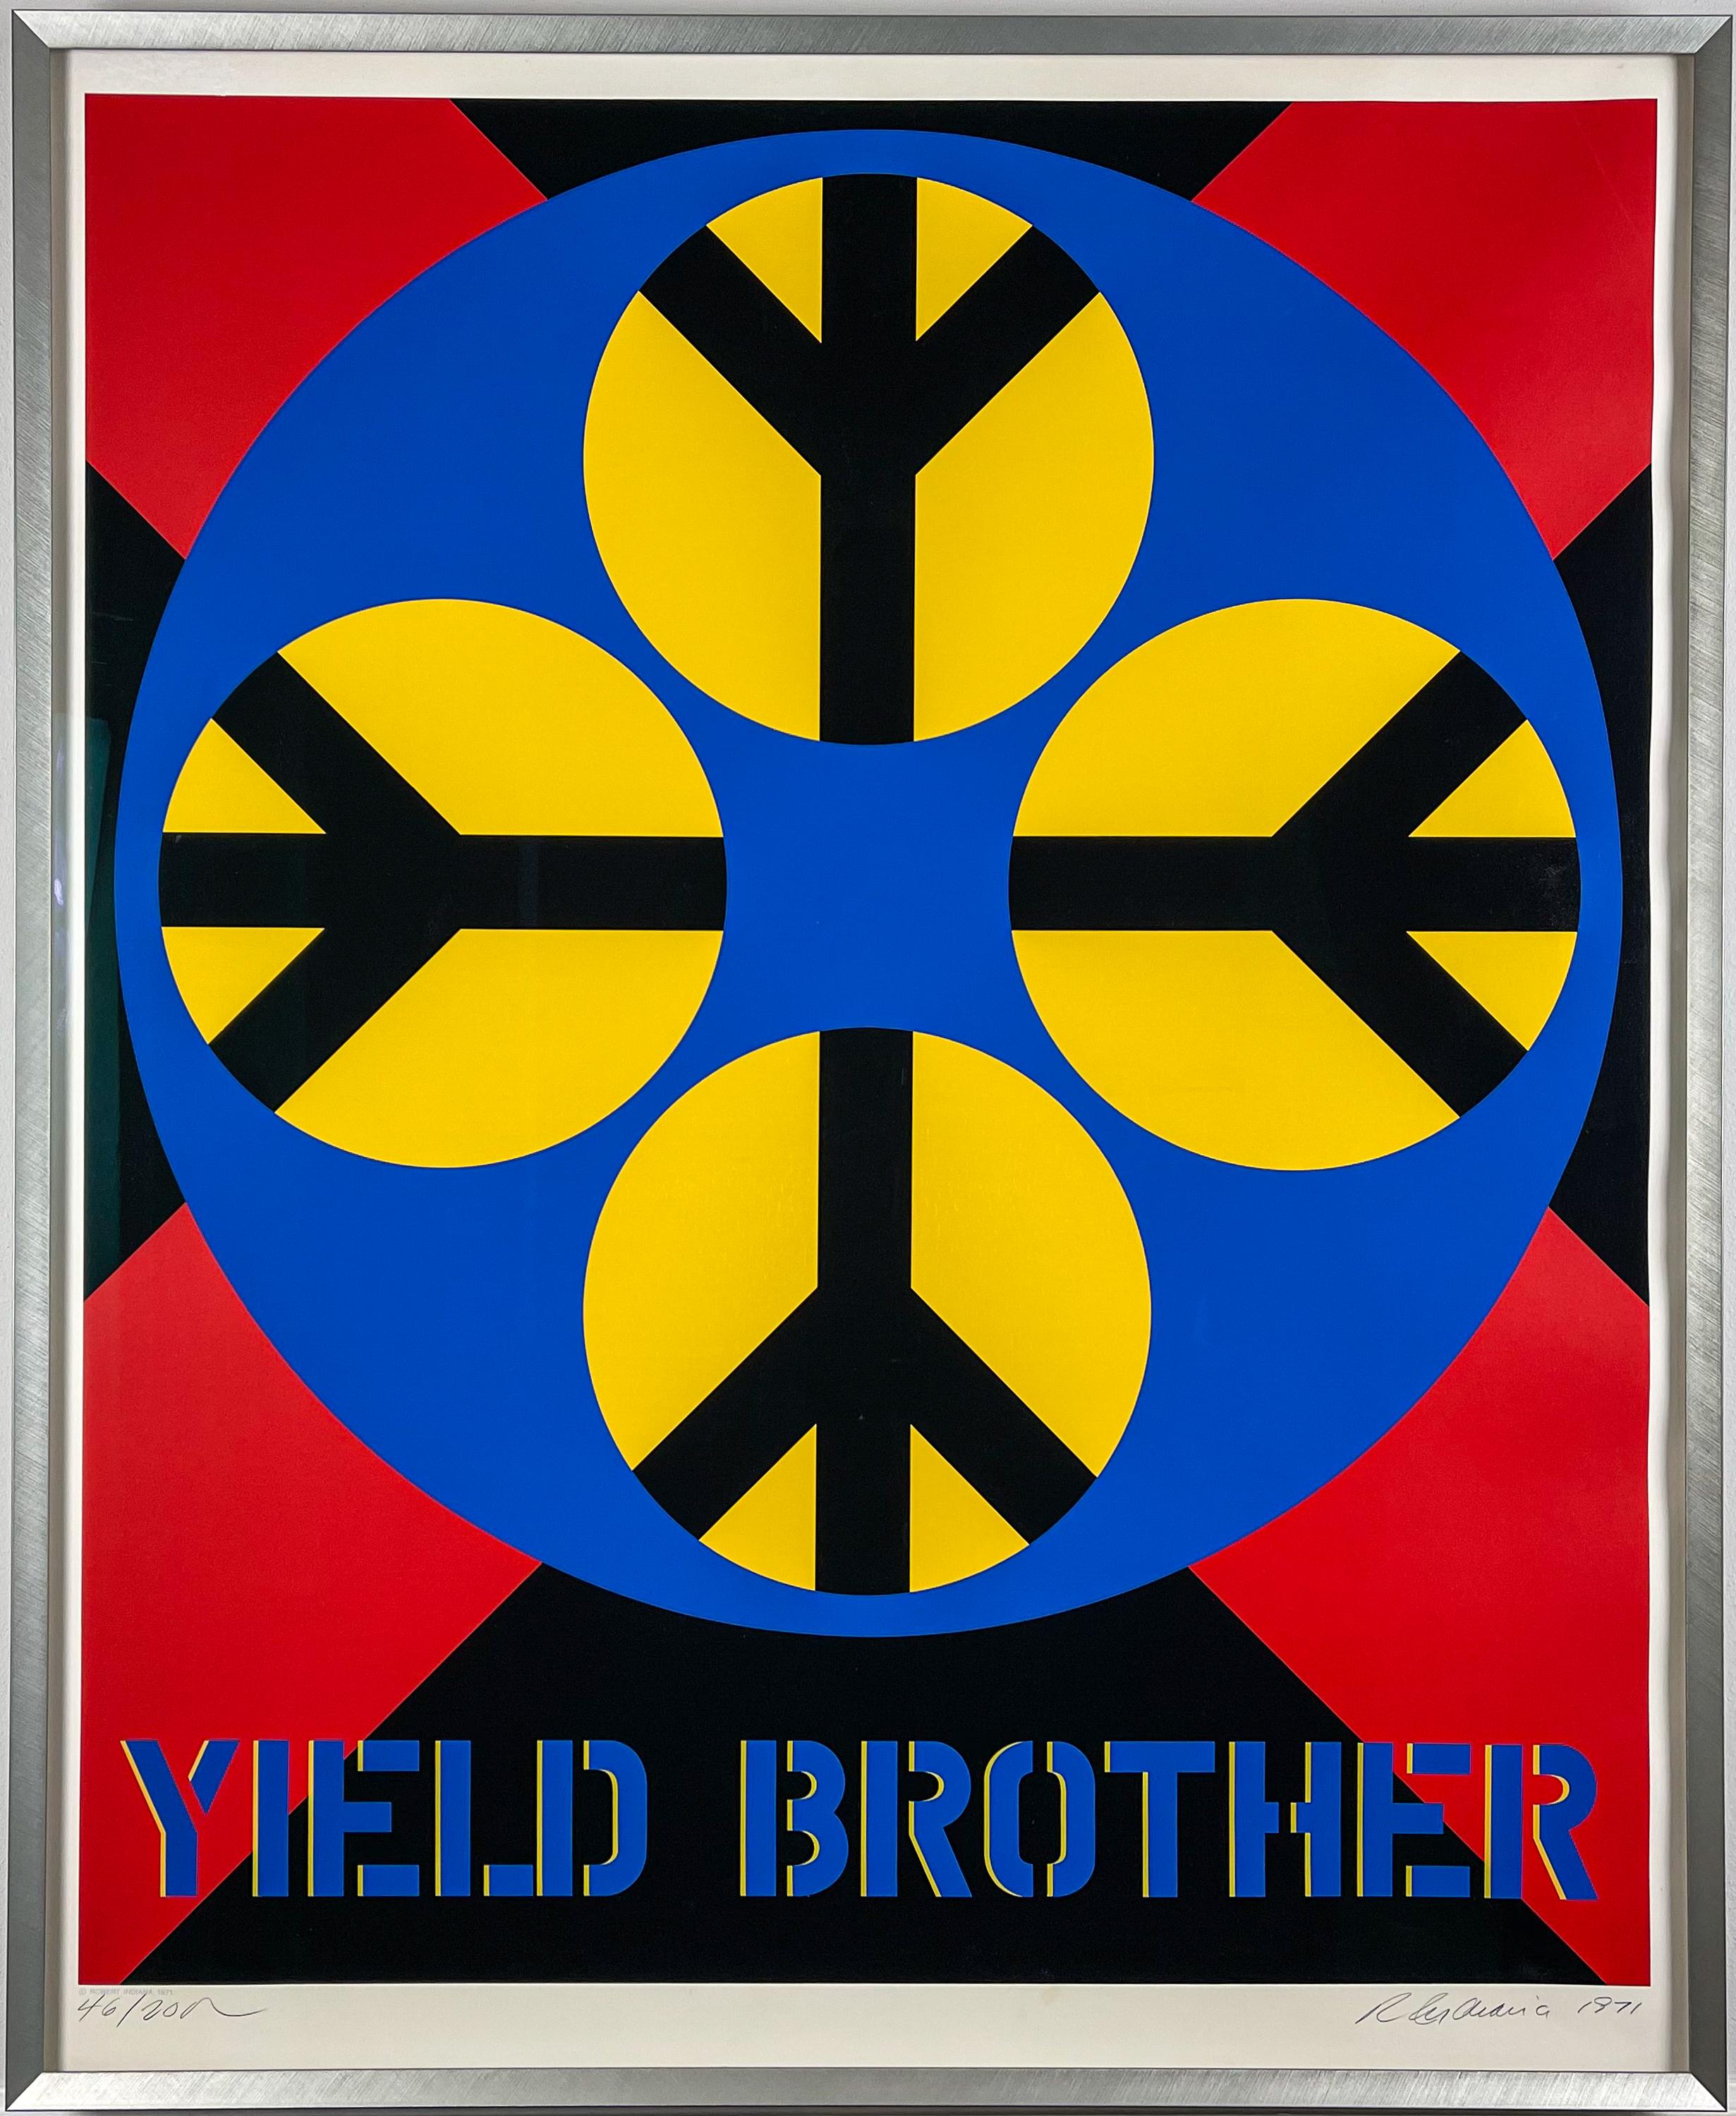 Late 20th Century Pop Art Robert Indiana Yield Brother 1971 Screenprint Edition 230 Red Blue For Sale